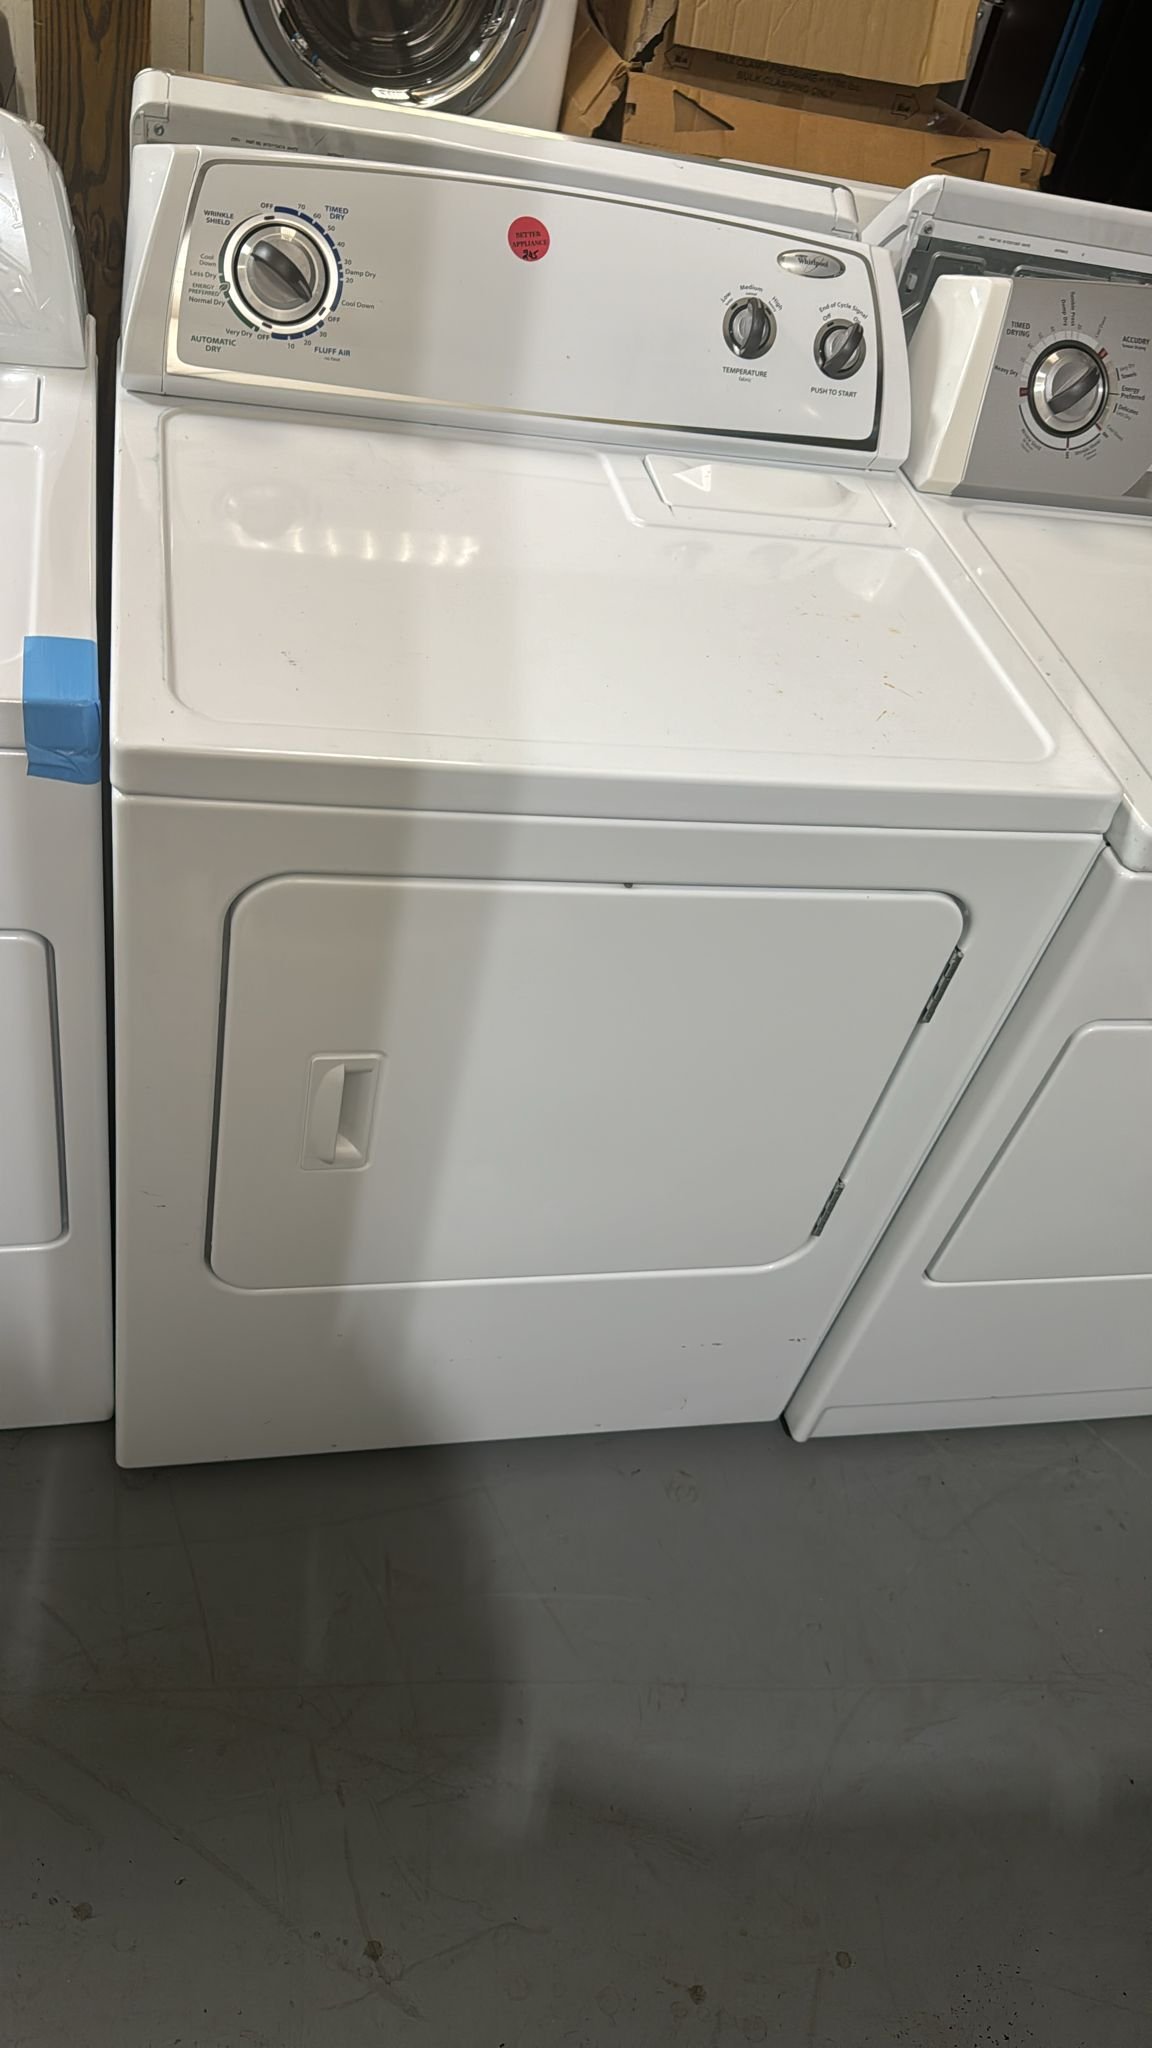 Whirlpool Used Front Load Dryer – White